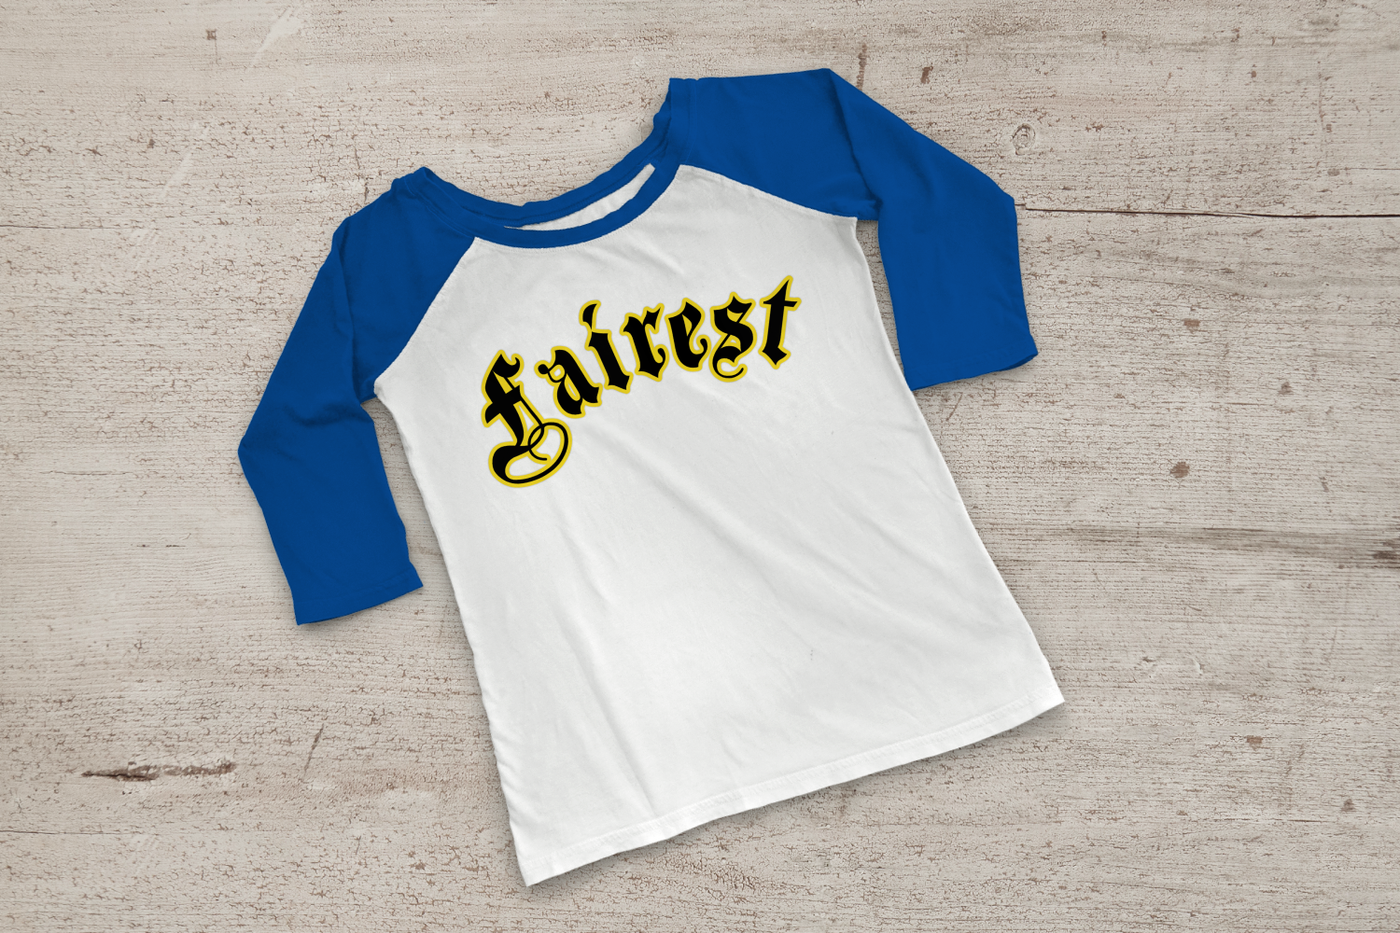 Blue and white raglan tee with the word "fairest" in a fairy tale blackletter font with a yellow offset outline.